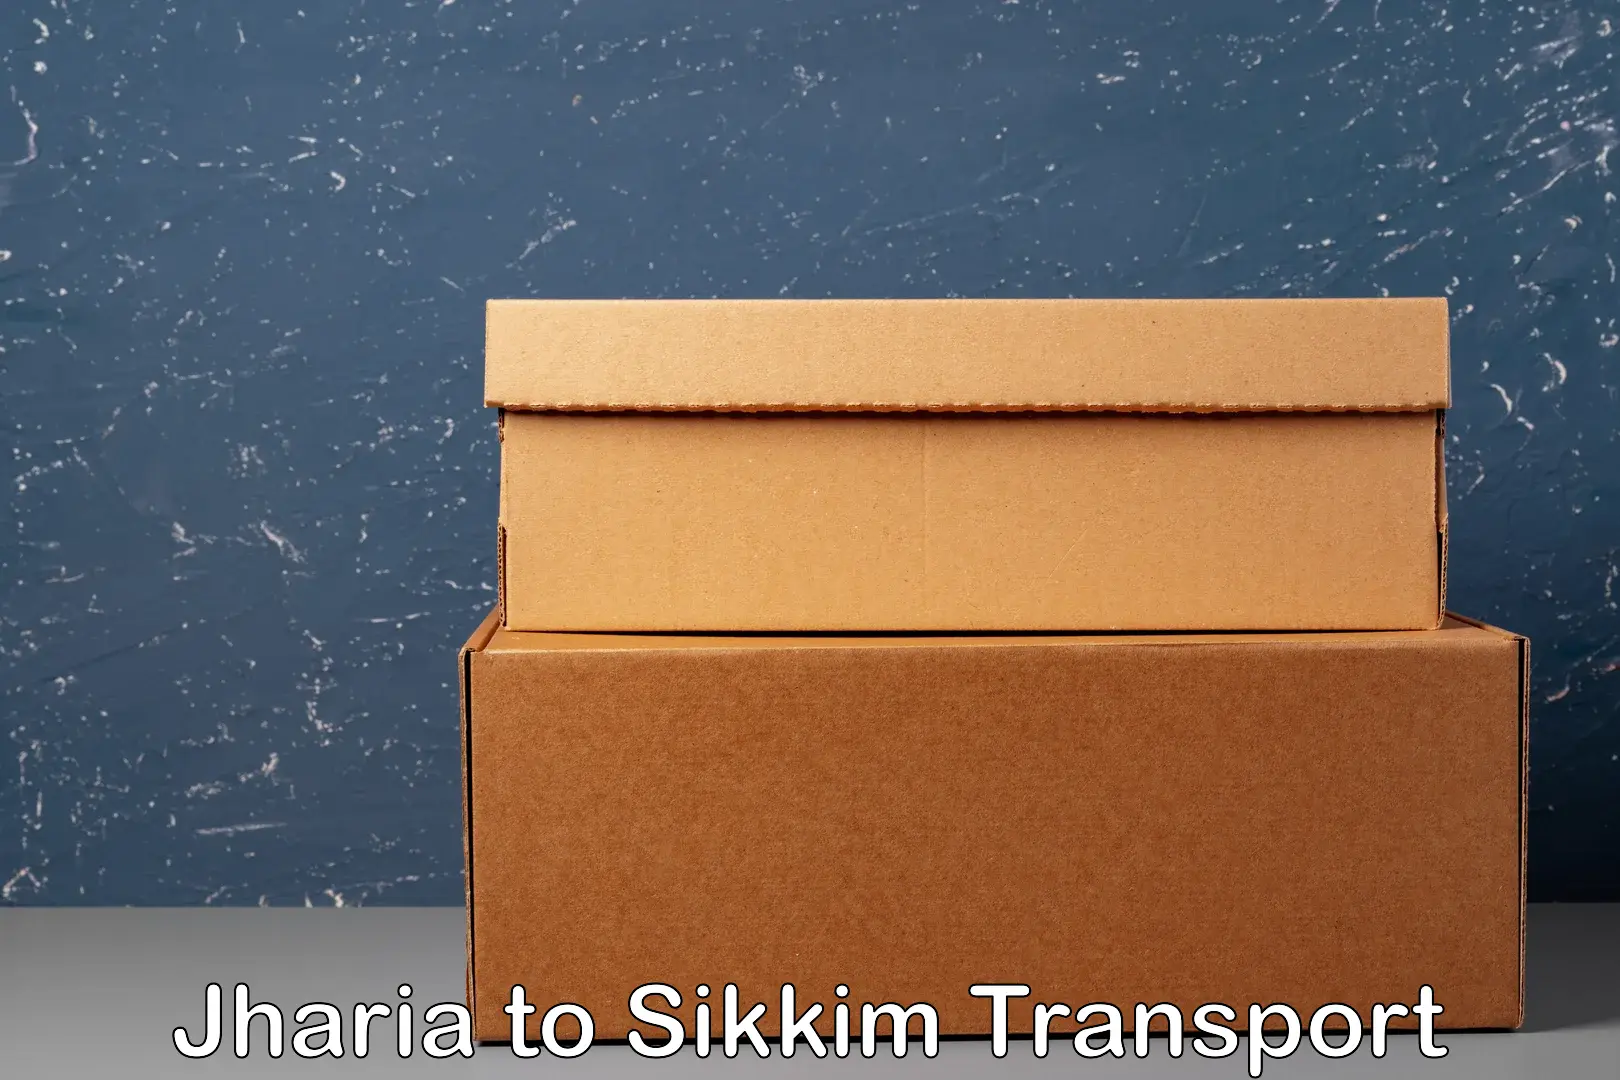 Transport bike from one state to another Jharia to Sikkim